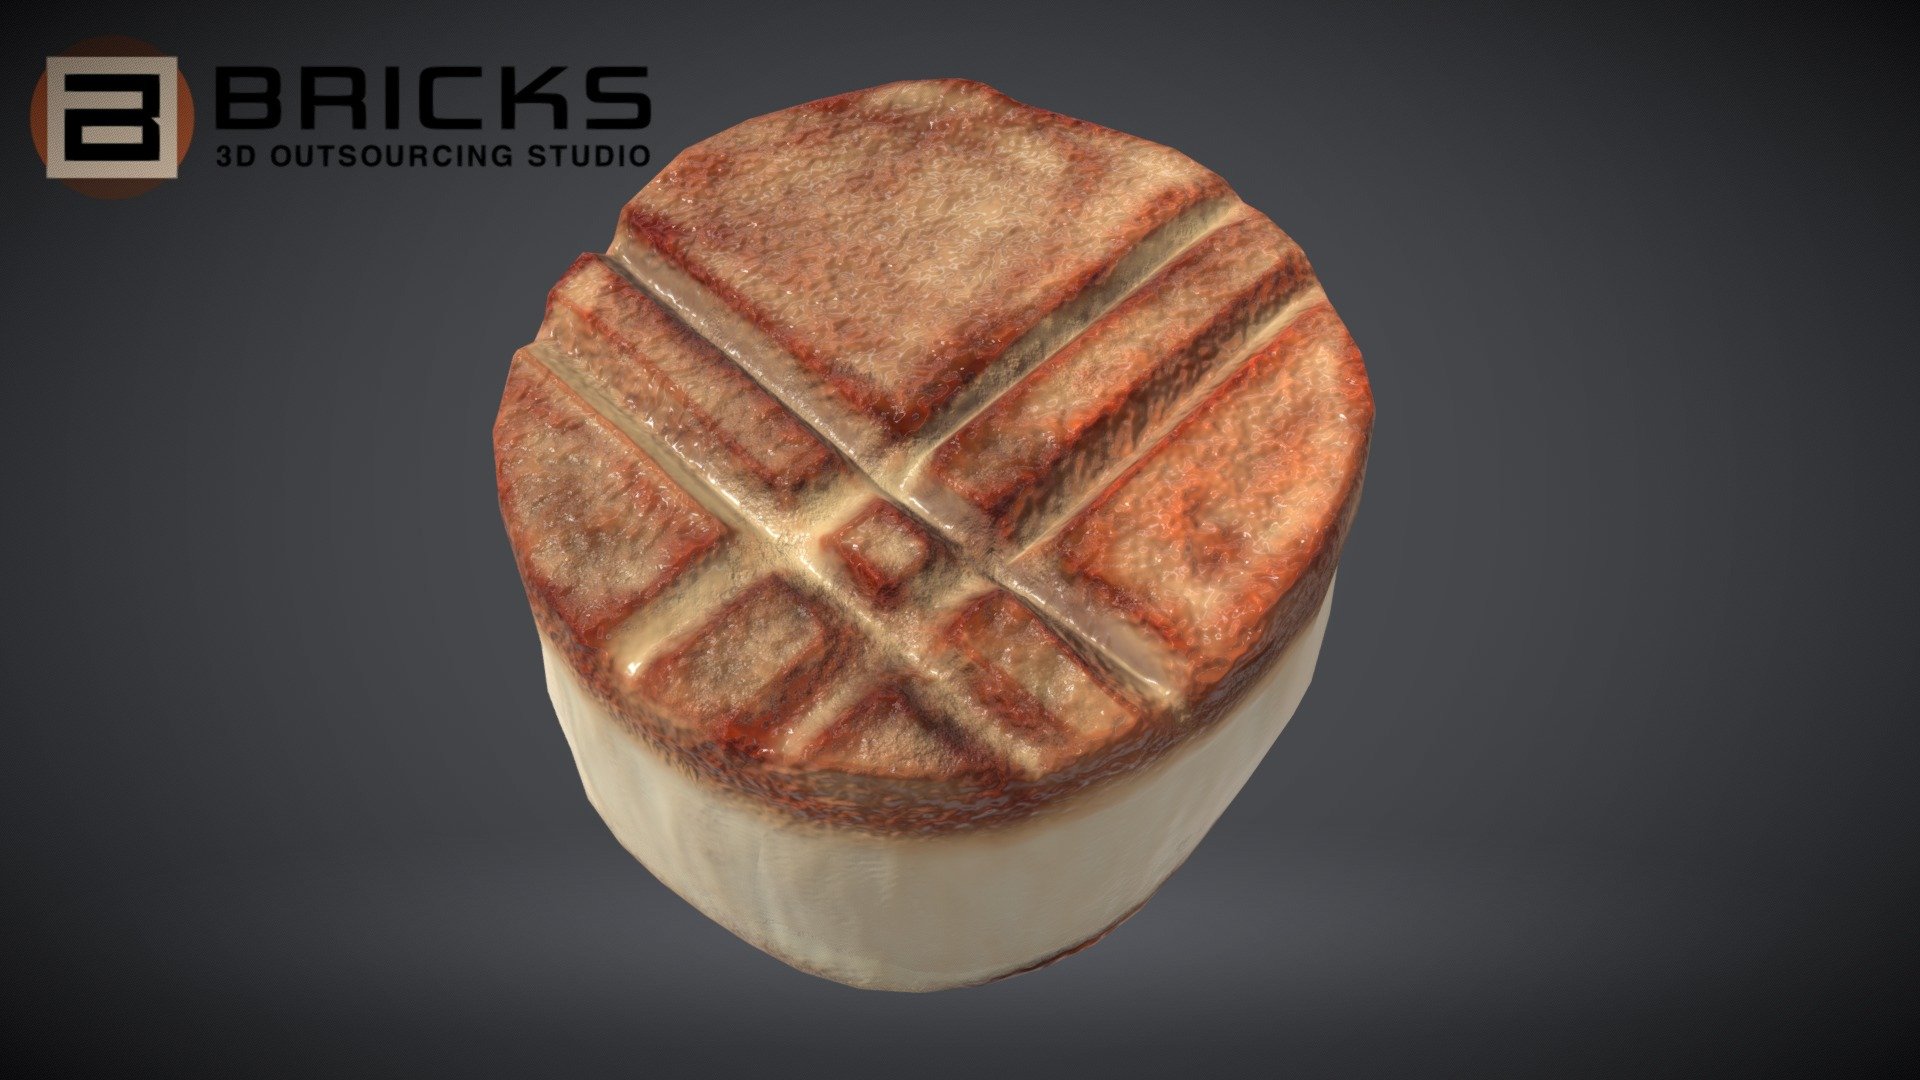 PBR Food Asset:
Scallop
Polycount: 1004
Vertex count: 504
Texture Size: 2048px x 2048px
Normal: OpenGL

If you need any adjust in file please contact us: team@bricks3dstudio.com

Hire us: tringuyen@bricks3dstudio.com
Here is us: https://www.bricks3dstudio.com/
        https://www.artstation.com/bricksstudio
        https://www.facebook.com/Bricks3dstudio/
        https://www.linkedin.com/in/bricks-studio-b10462252/ - Scallop - Buy Royalty Free 3D model by Bricks Studio (@bricks3dstudio) 3d model